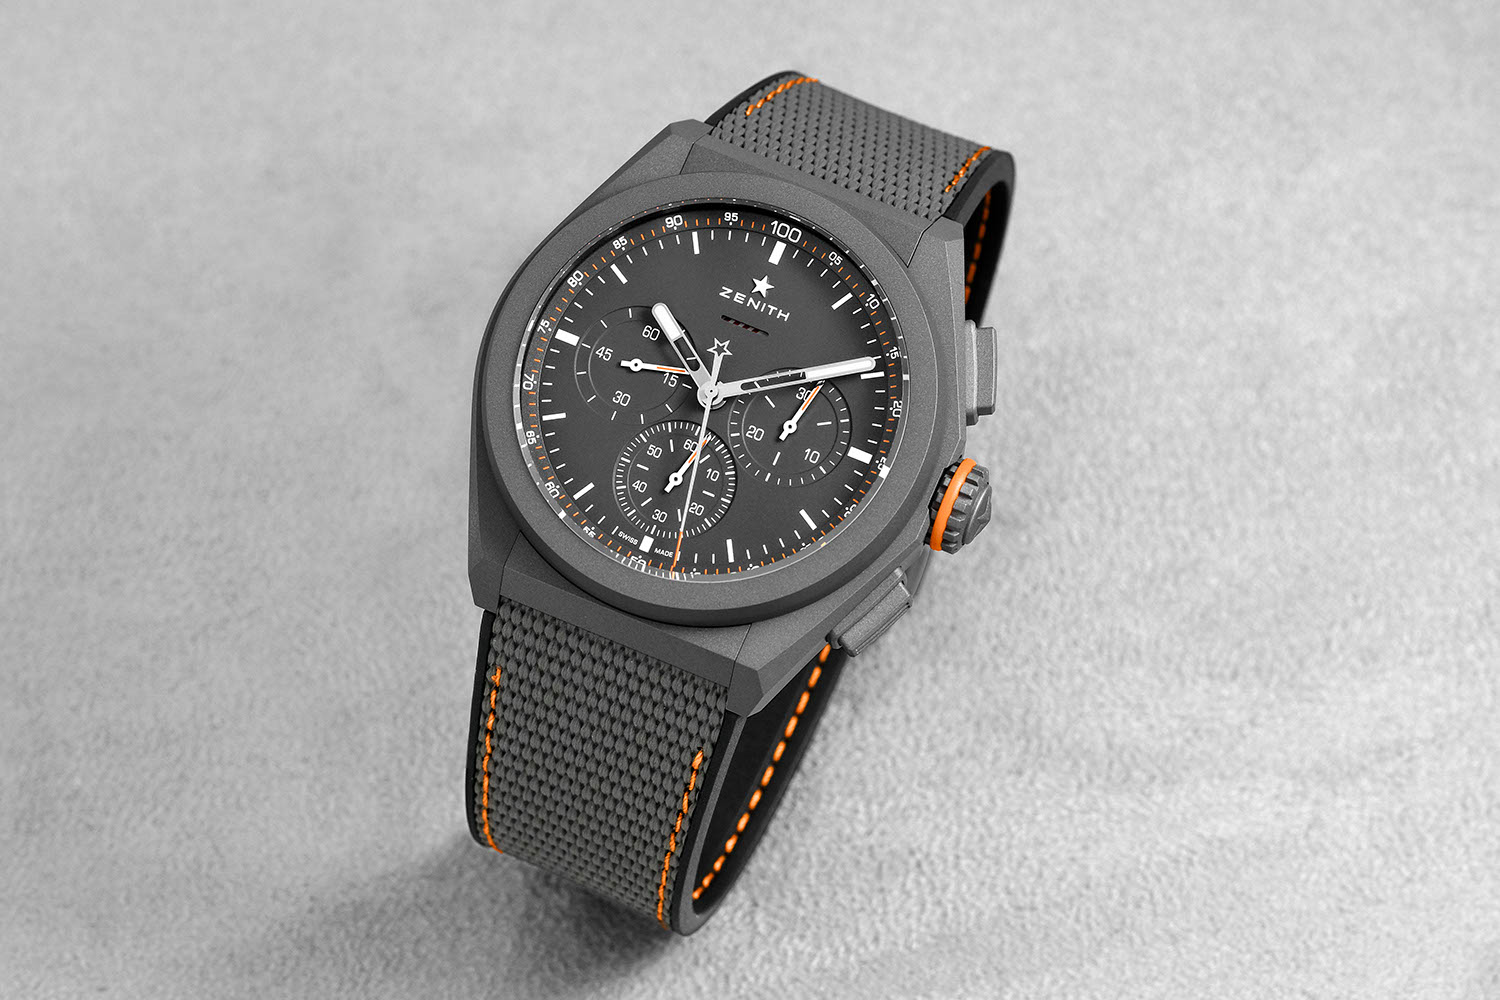 The Zenith Defy 21 Land Rover Edition (Image © Revolution)